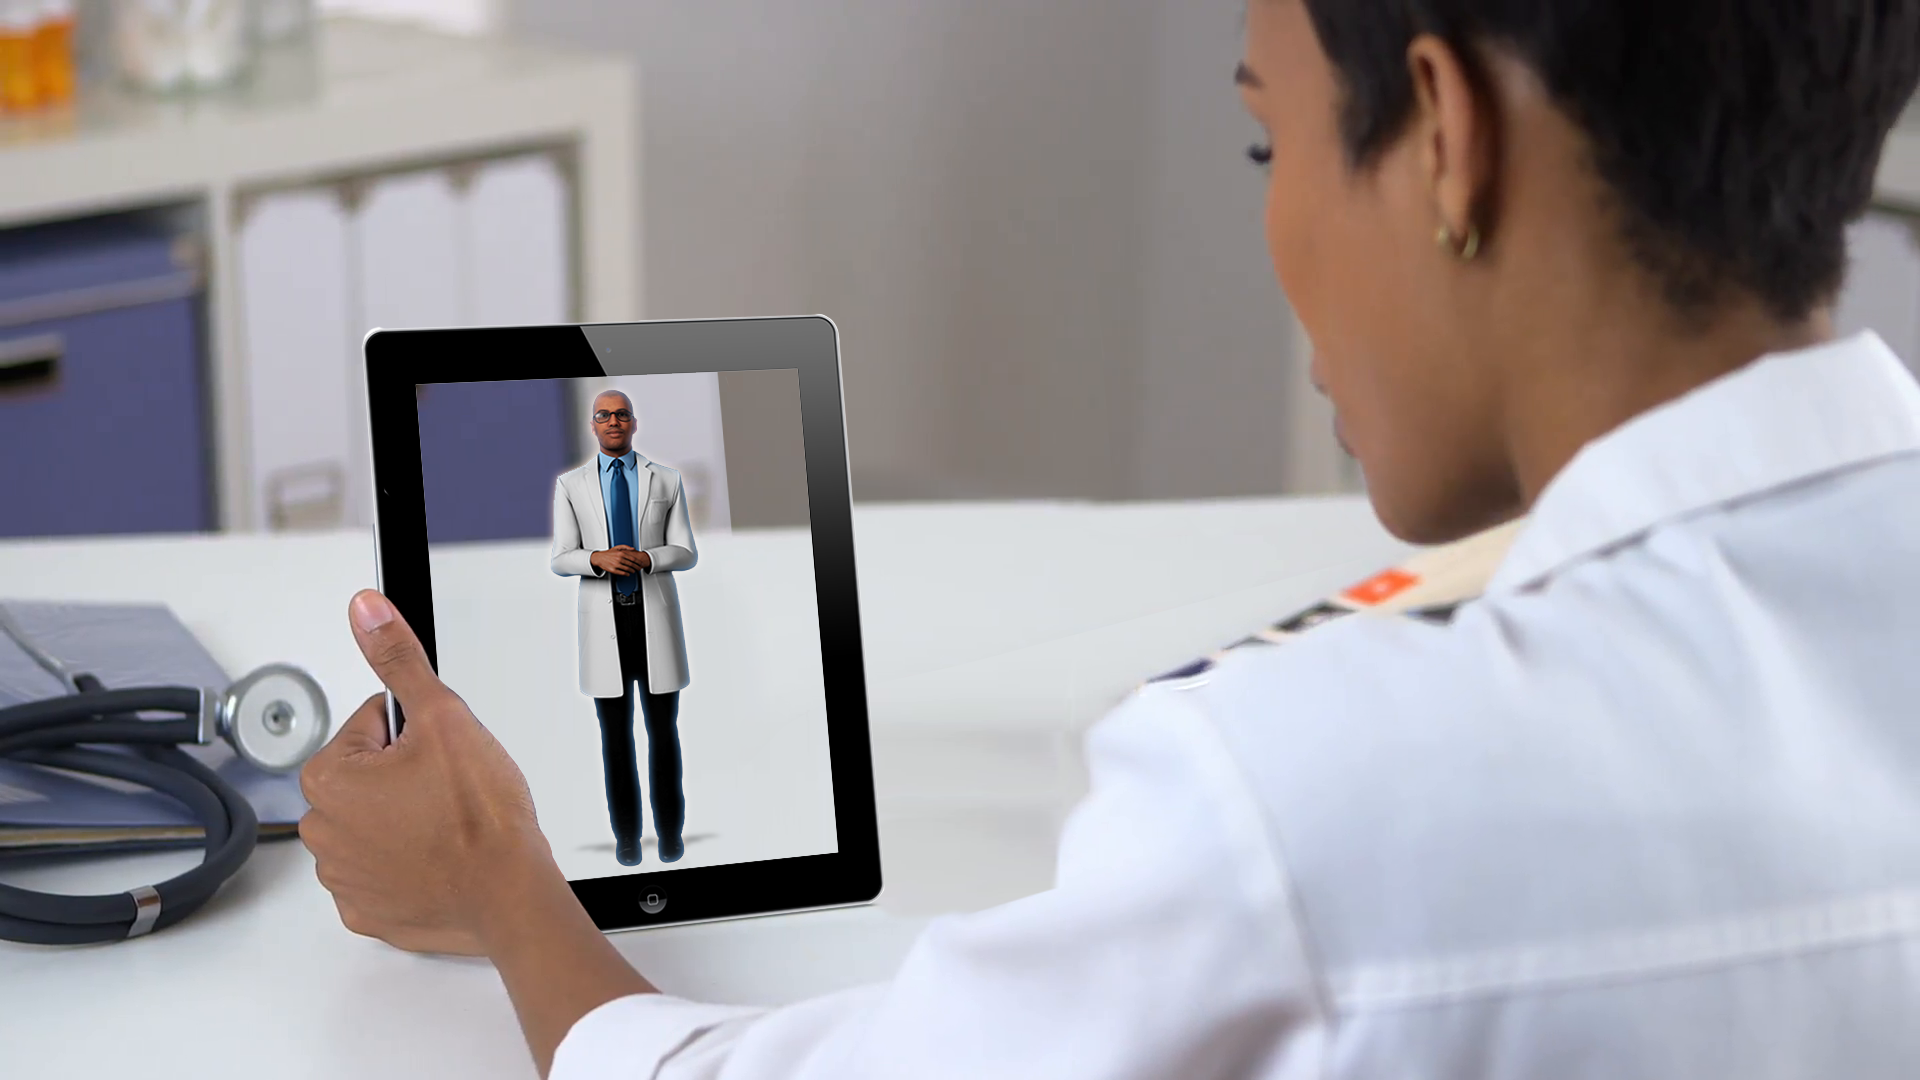 man holding an ipad with a prsonas hologram being shown in augmented reality